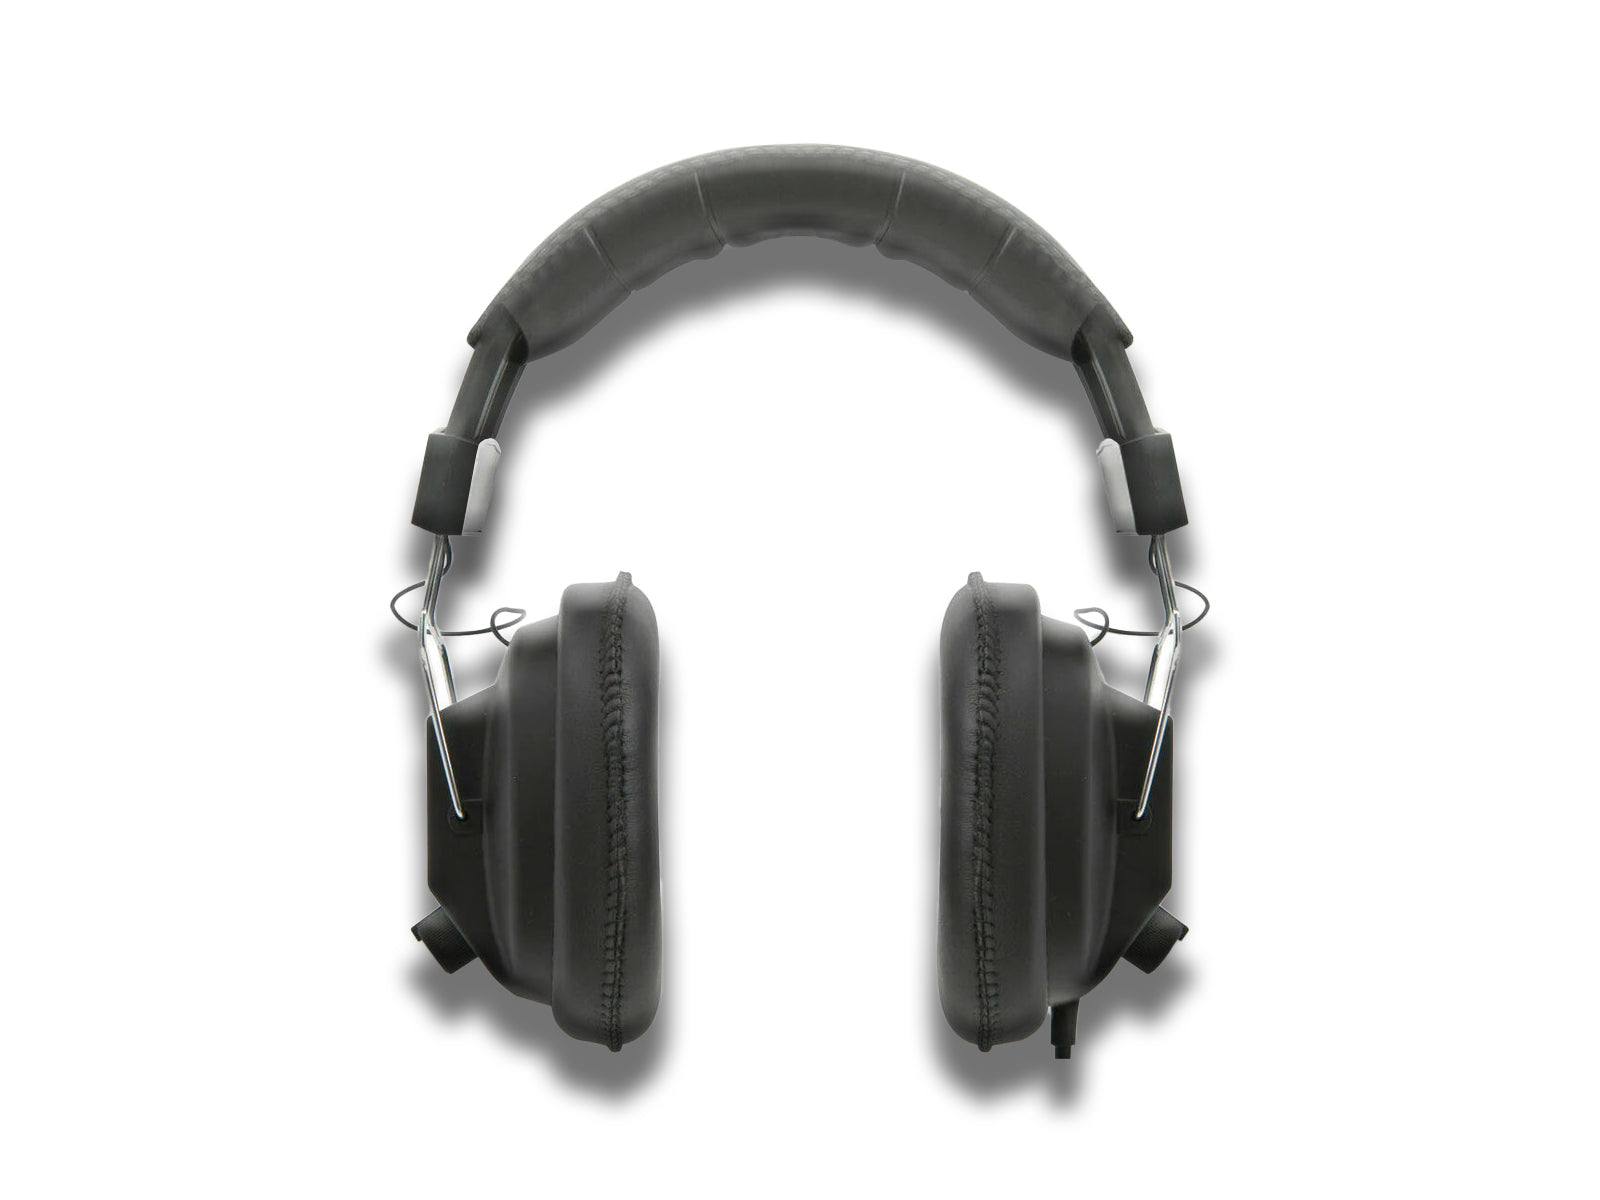 Picture-of-the-Professional-Headphones-With-Independent-R_L-volume-controls-AV-Link-on-the-white-background